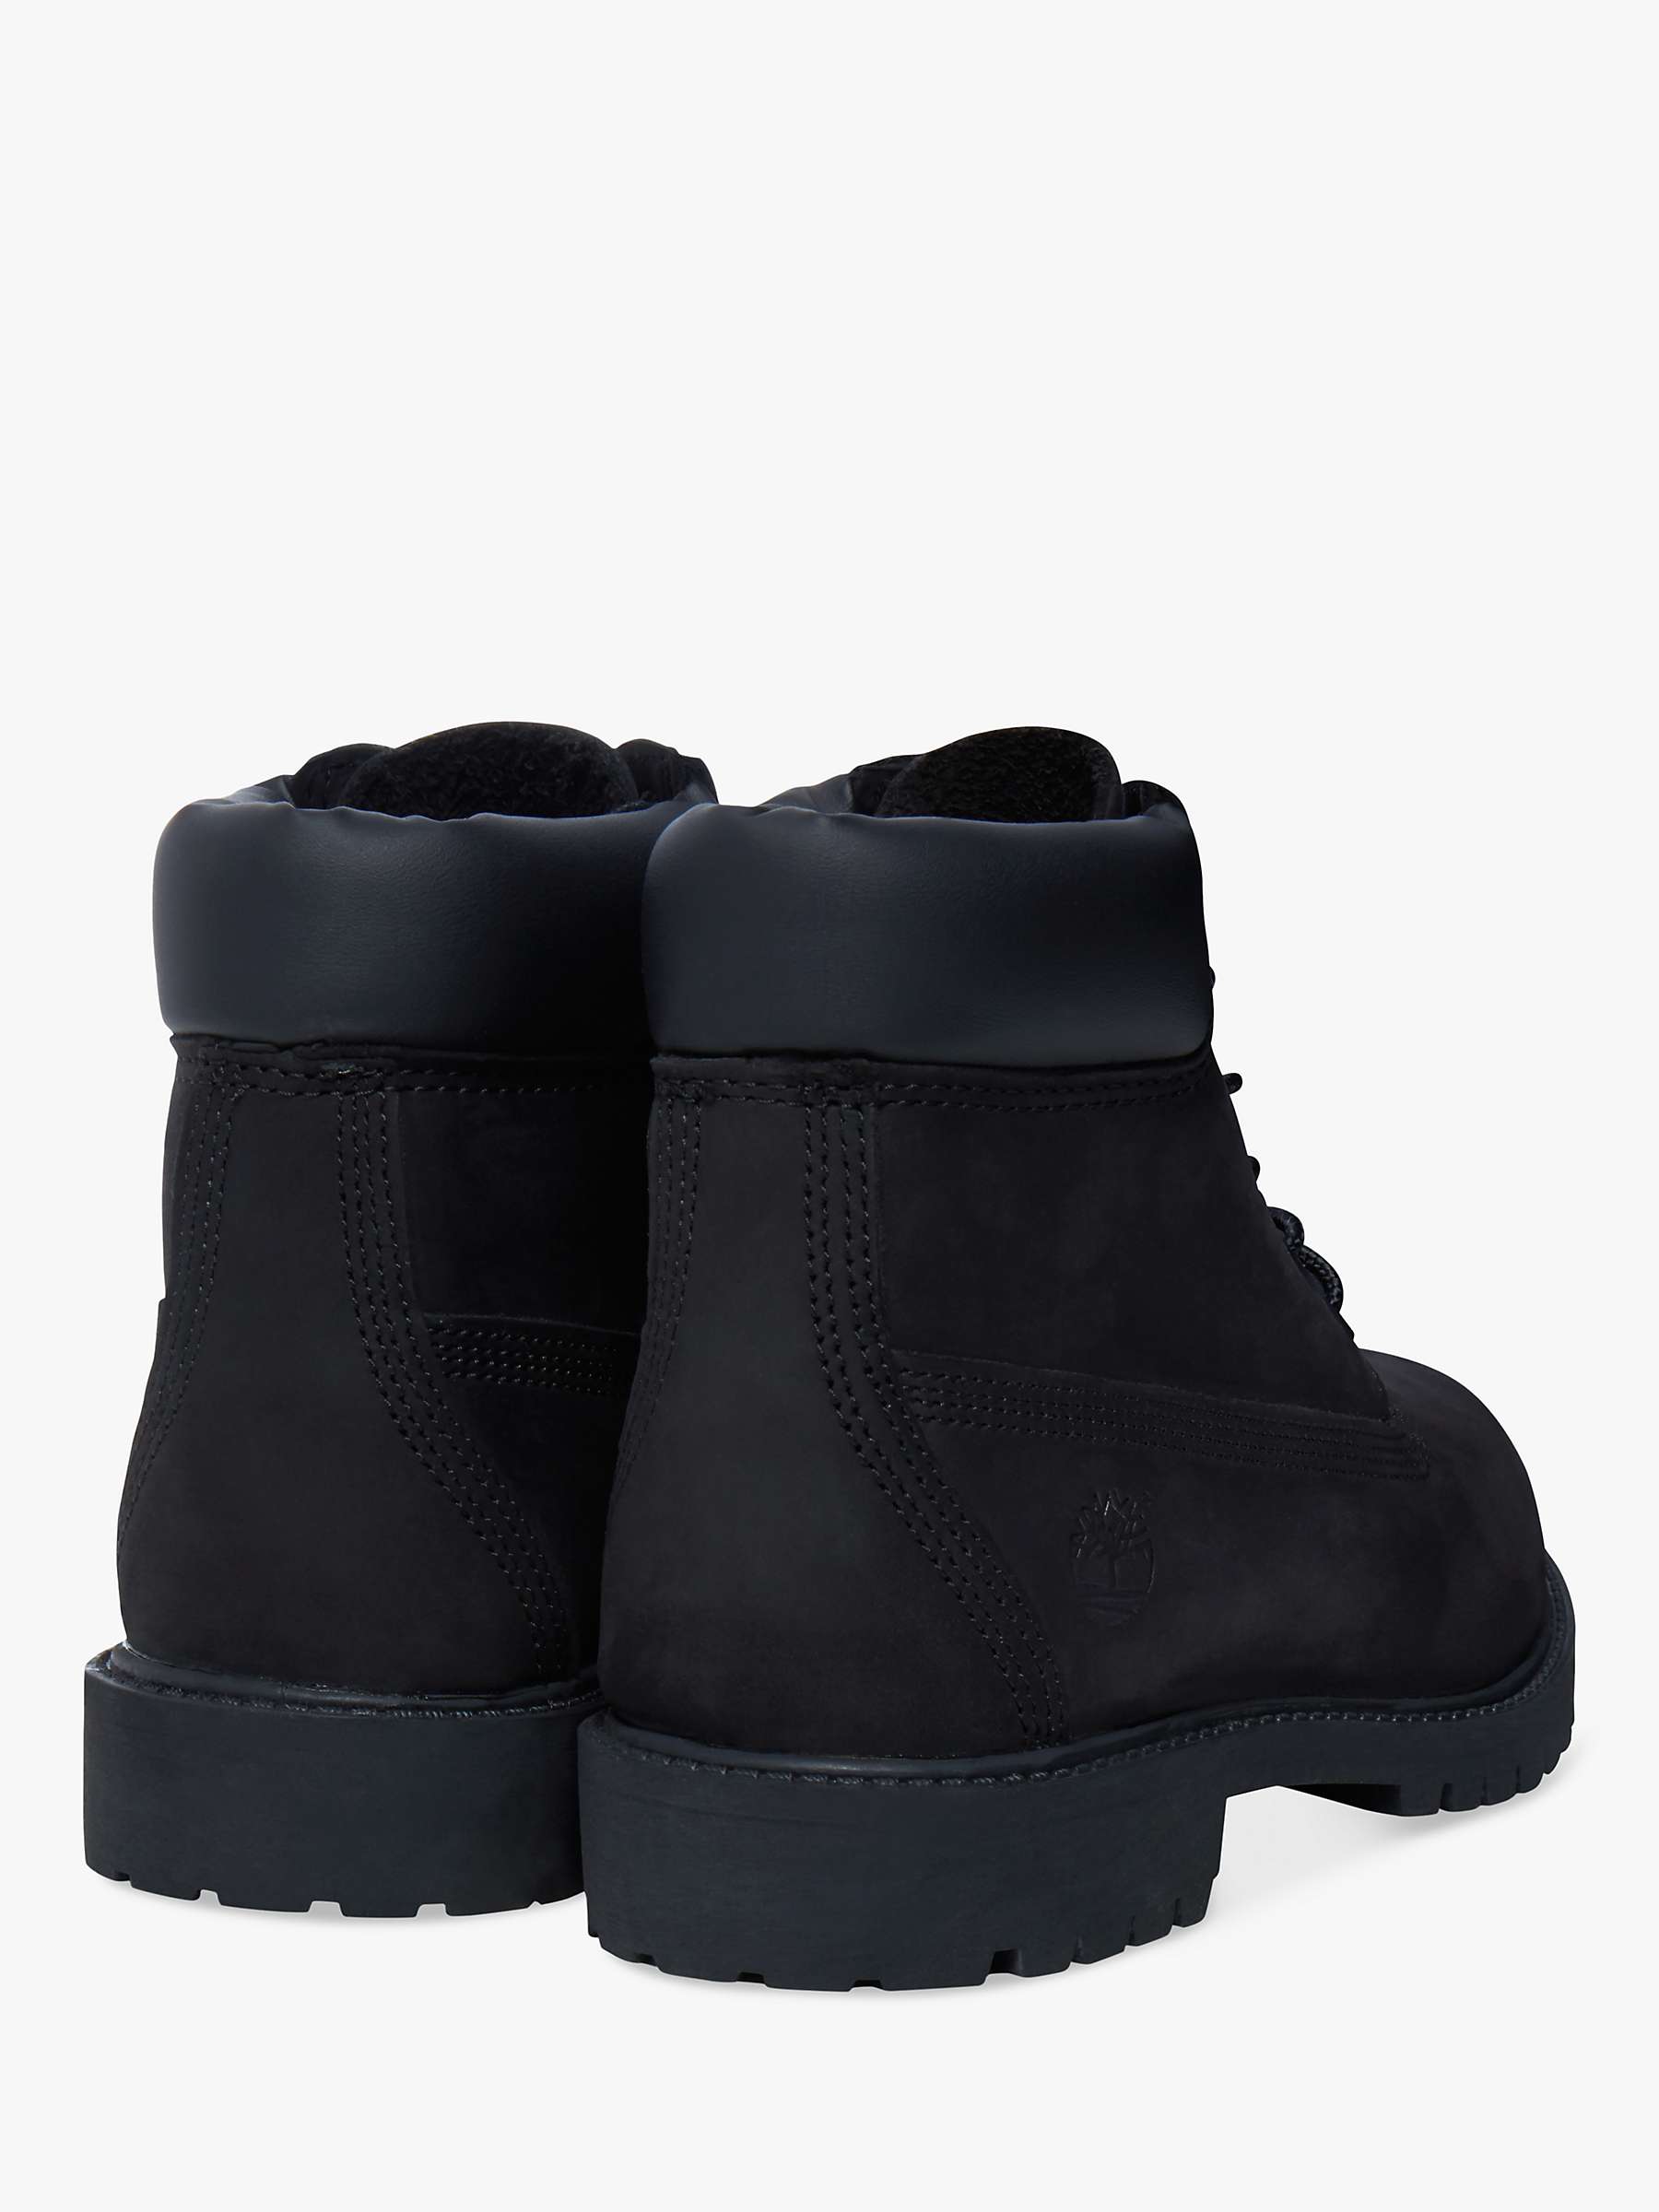 Buy Timberland Kids' Classic 6-Inch Premium Boots Online at johnlewis.com